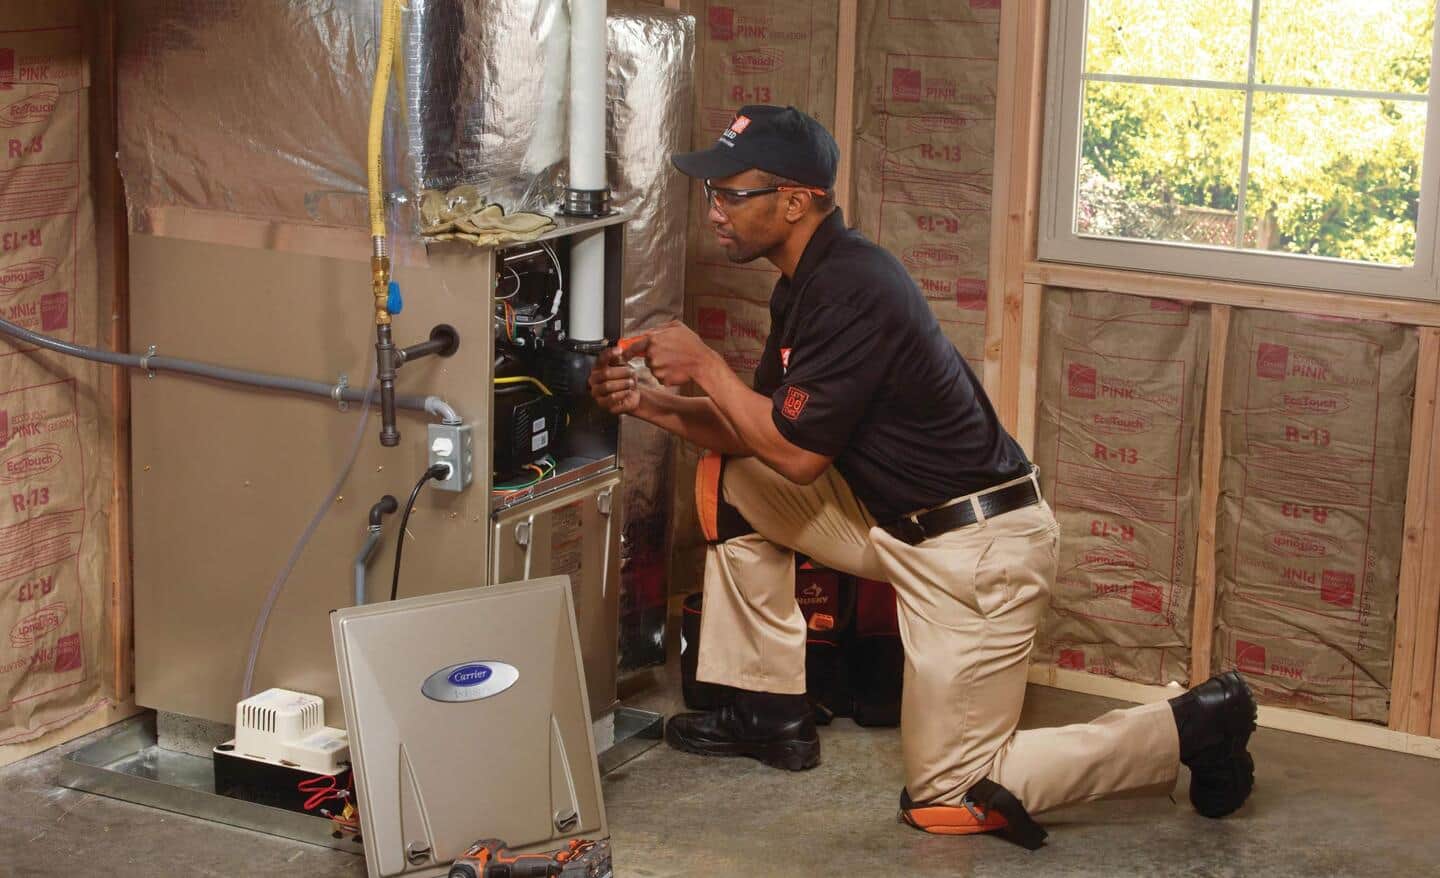 A Pro electrician converts an older HVAC system to electrical power